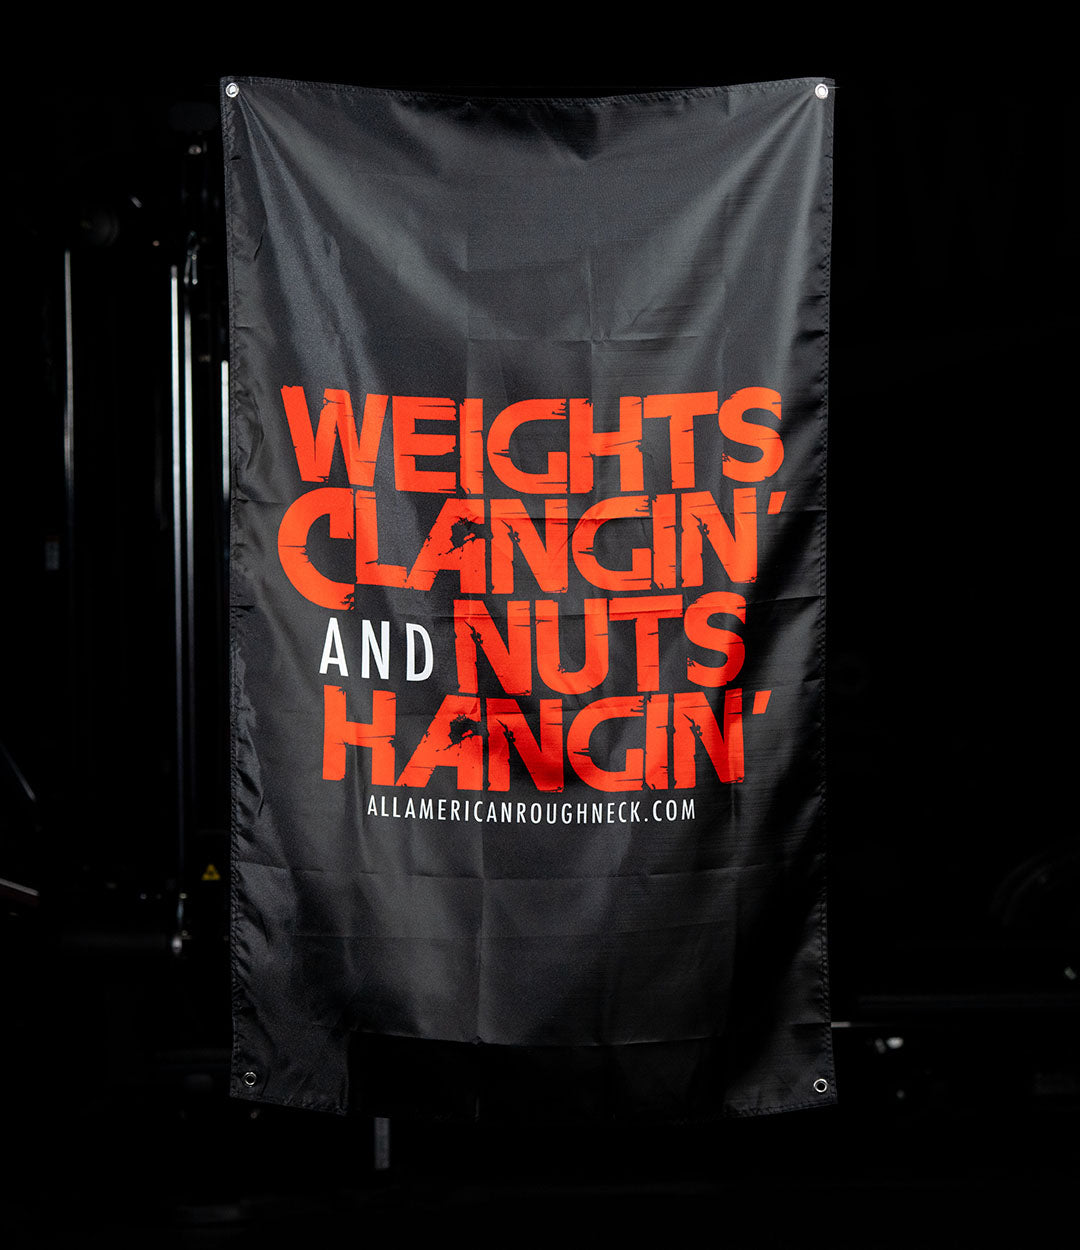 Weights Clangin' Nuts Hangin' Banner Flag